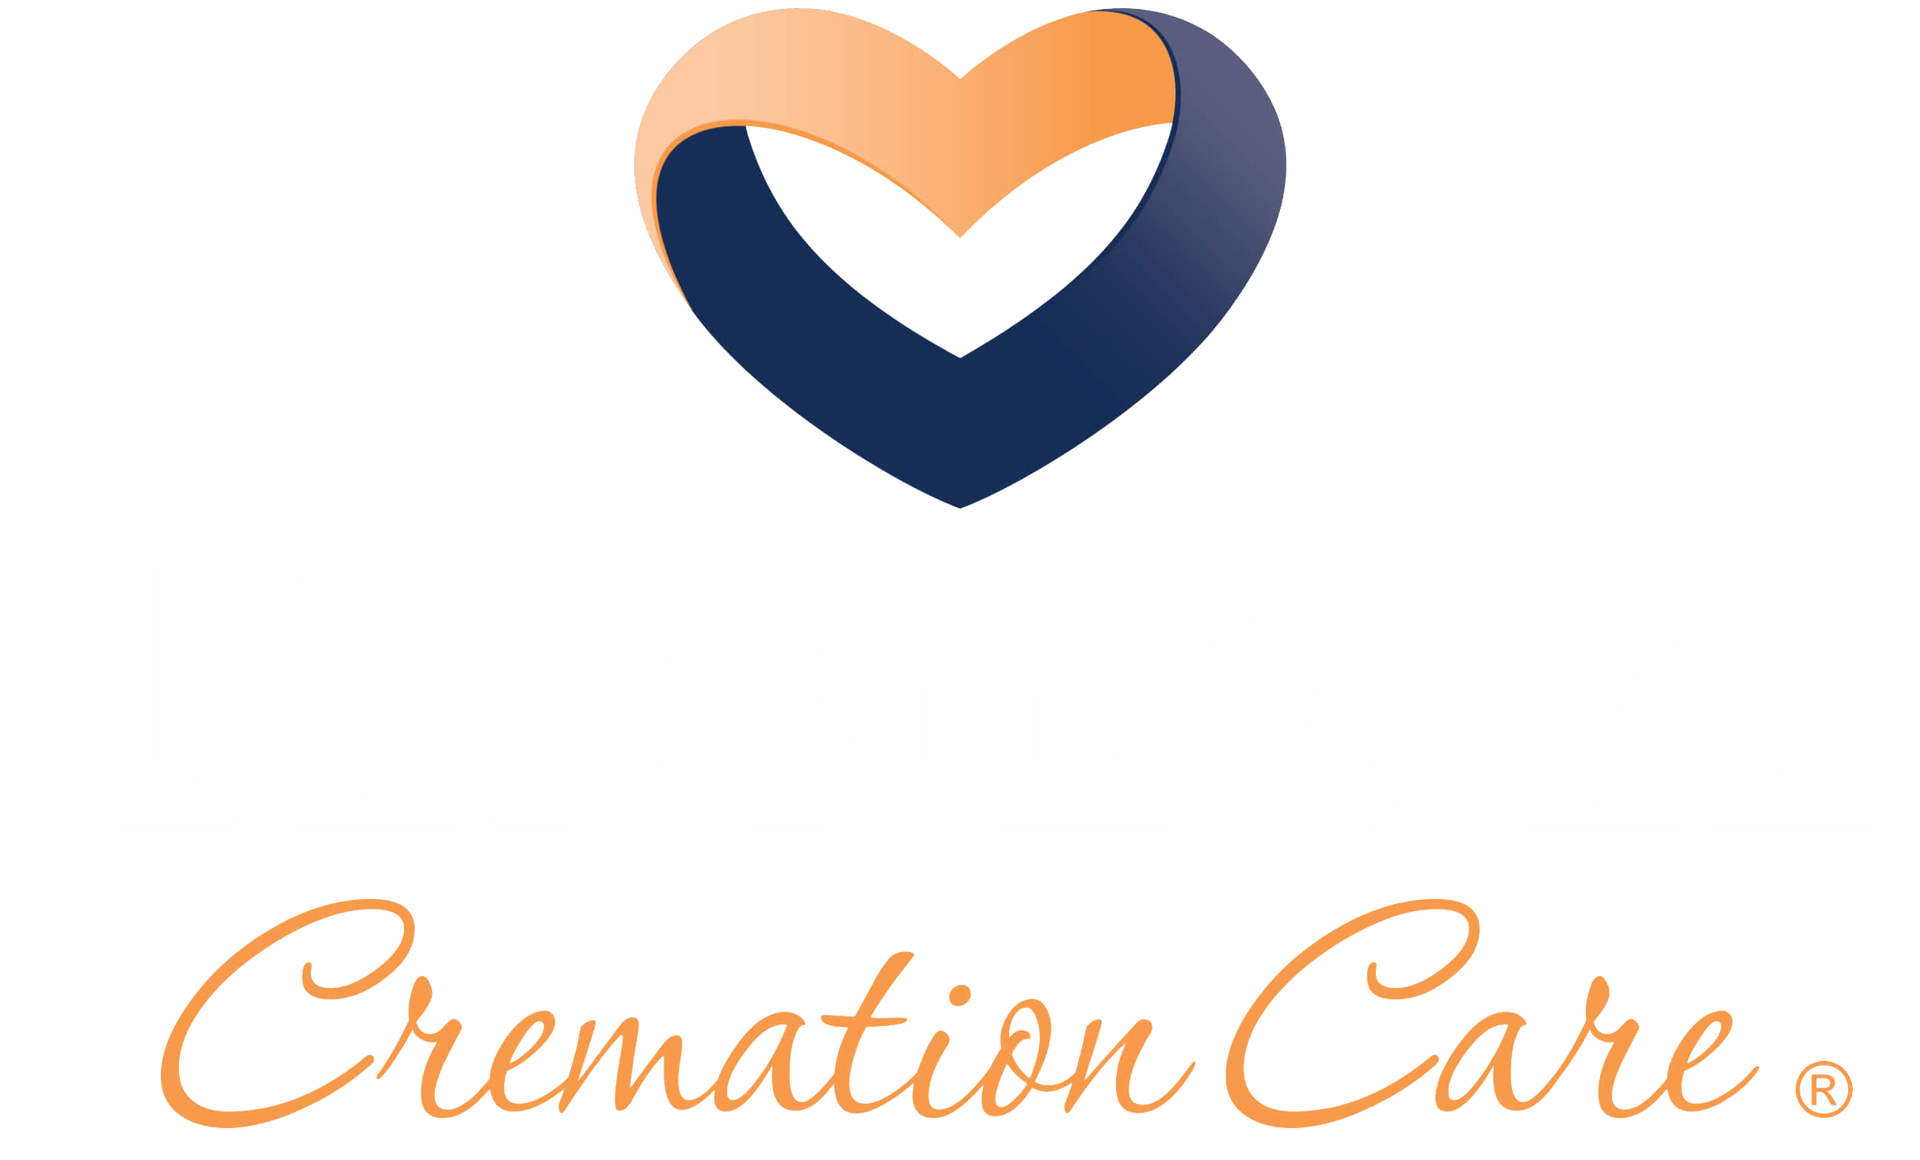 Tennessee Cremation Care Logo